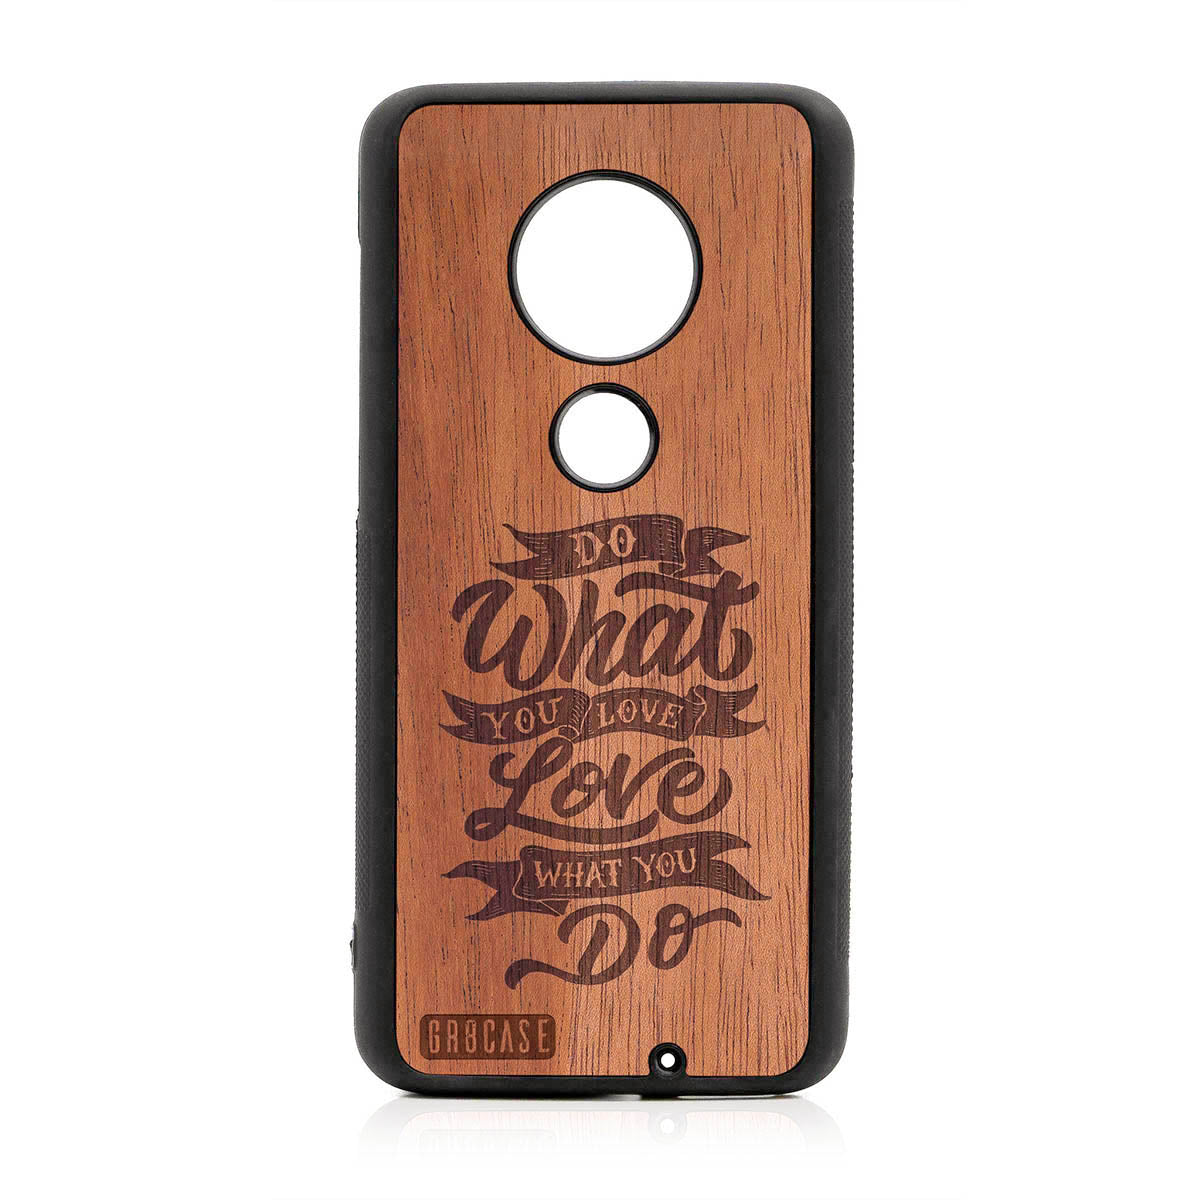 Do What You Love Love What You Do Design Wood Case For Moto G7 Plus by GR8CASE